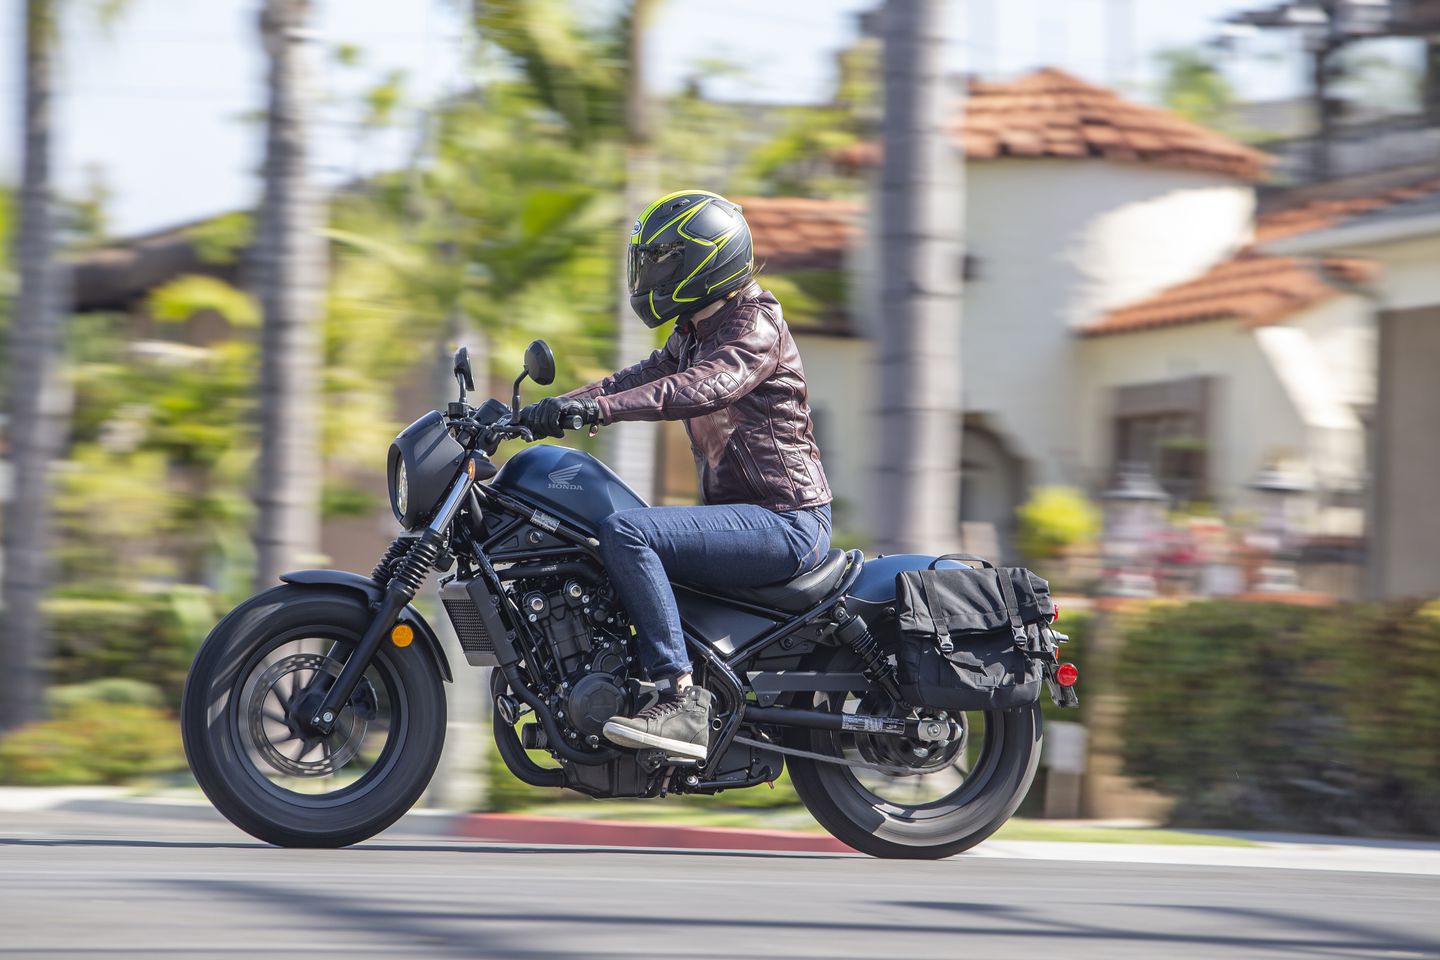 2020 Honda Rebel 500 First Ride Review | Cycle World